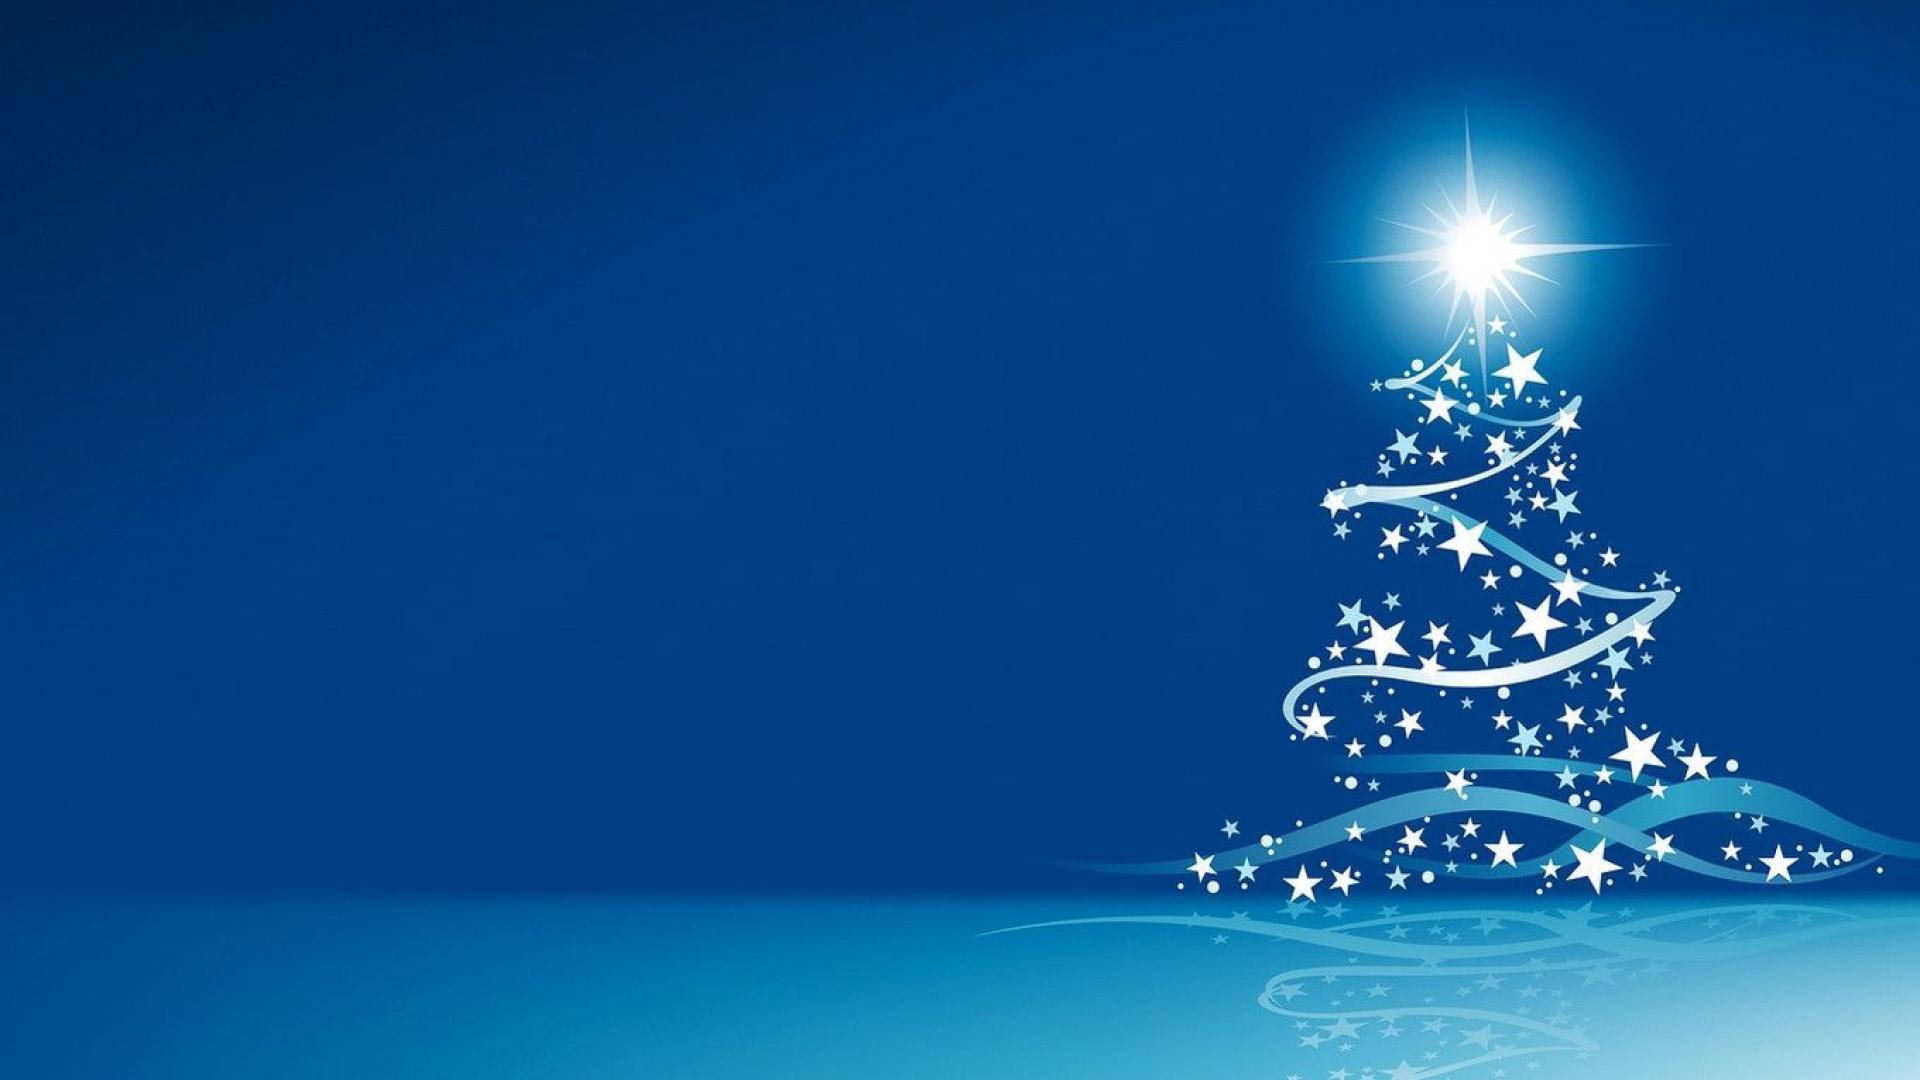 Christmas Tree Vector Art Wallpaper - Happy New Year Wishes To Followers -  1920x1080 Wallpaper 